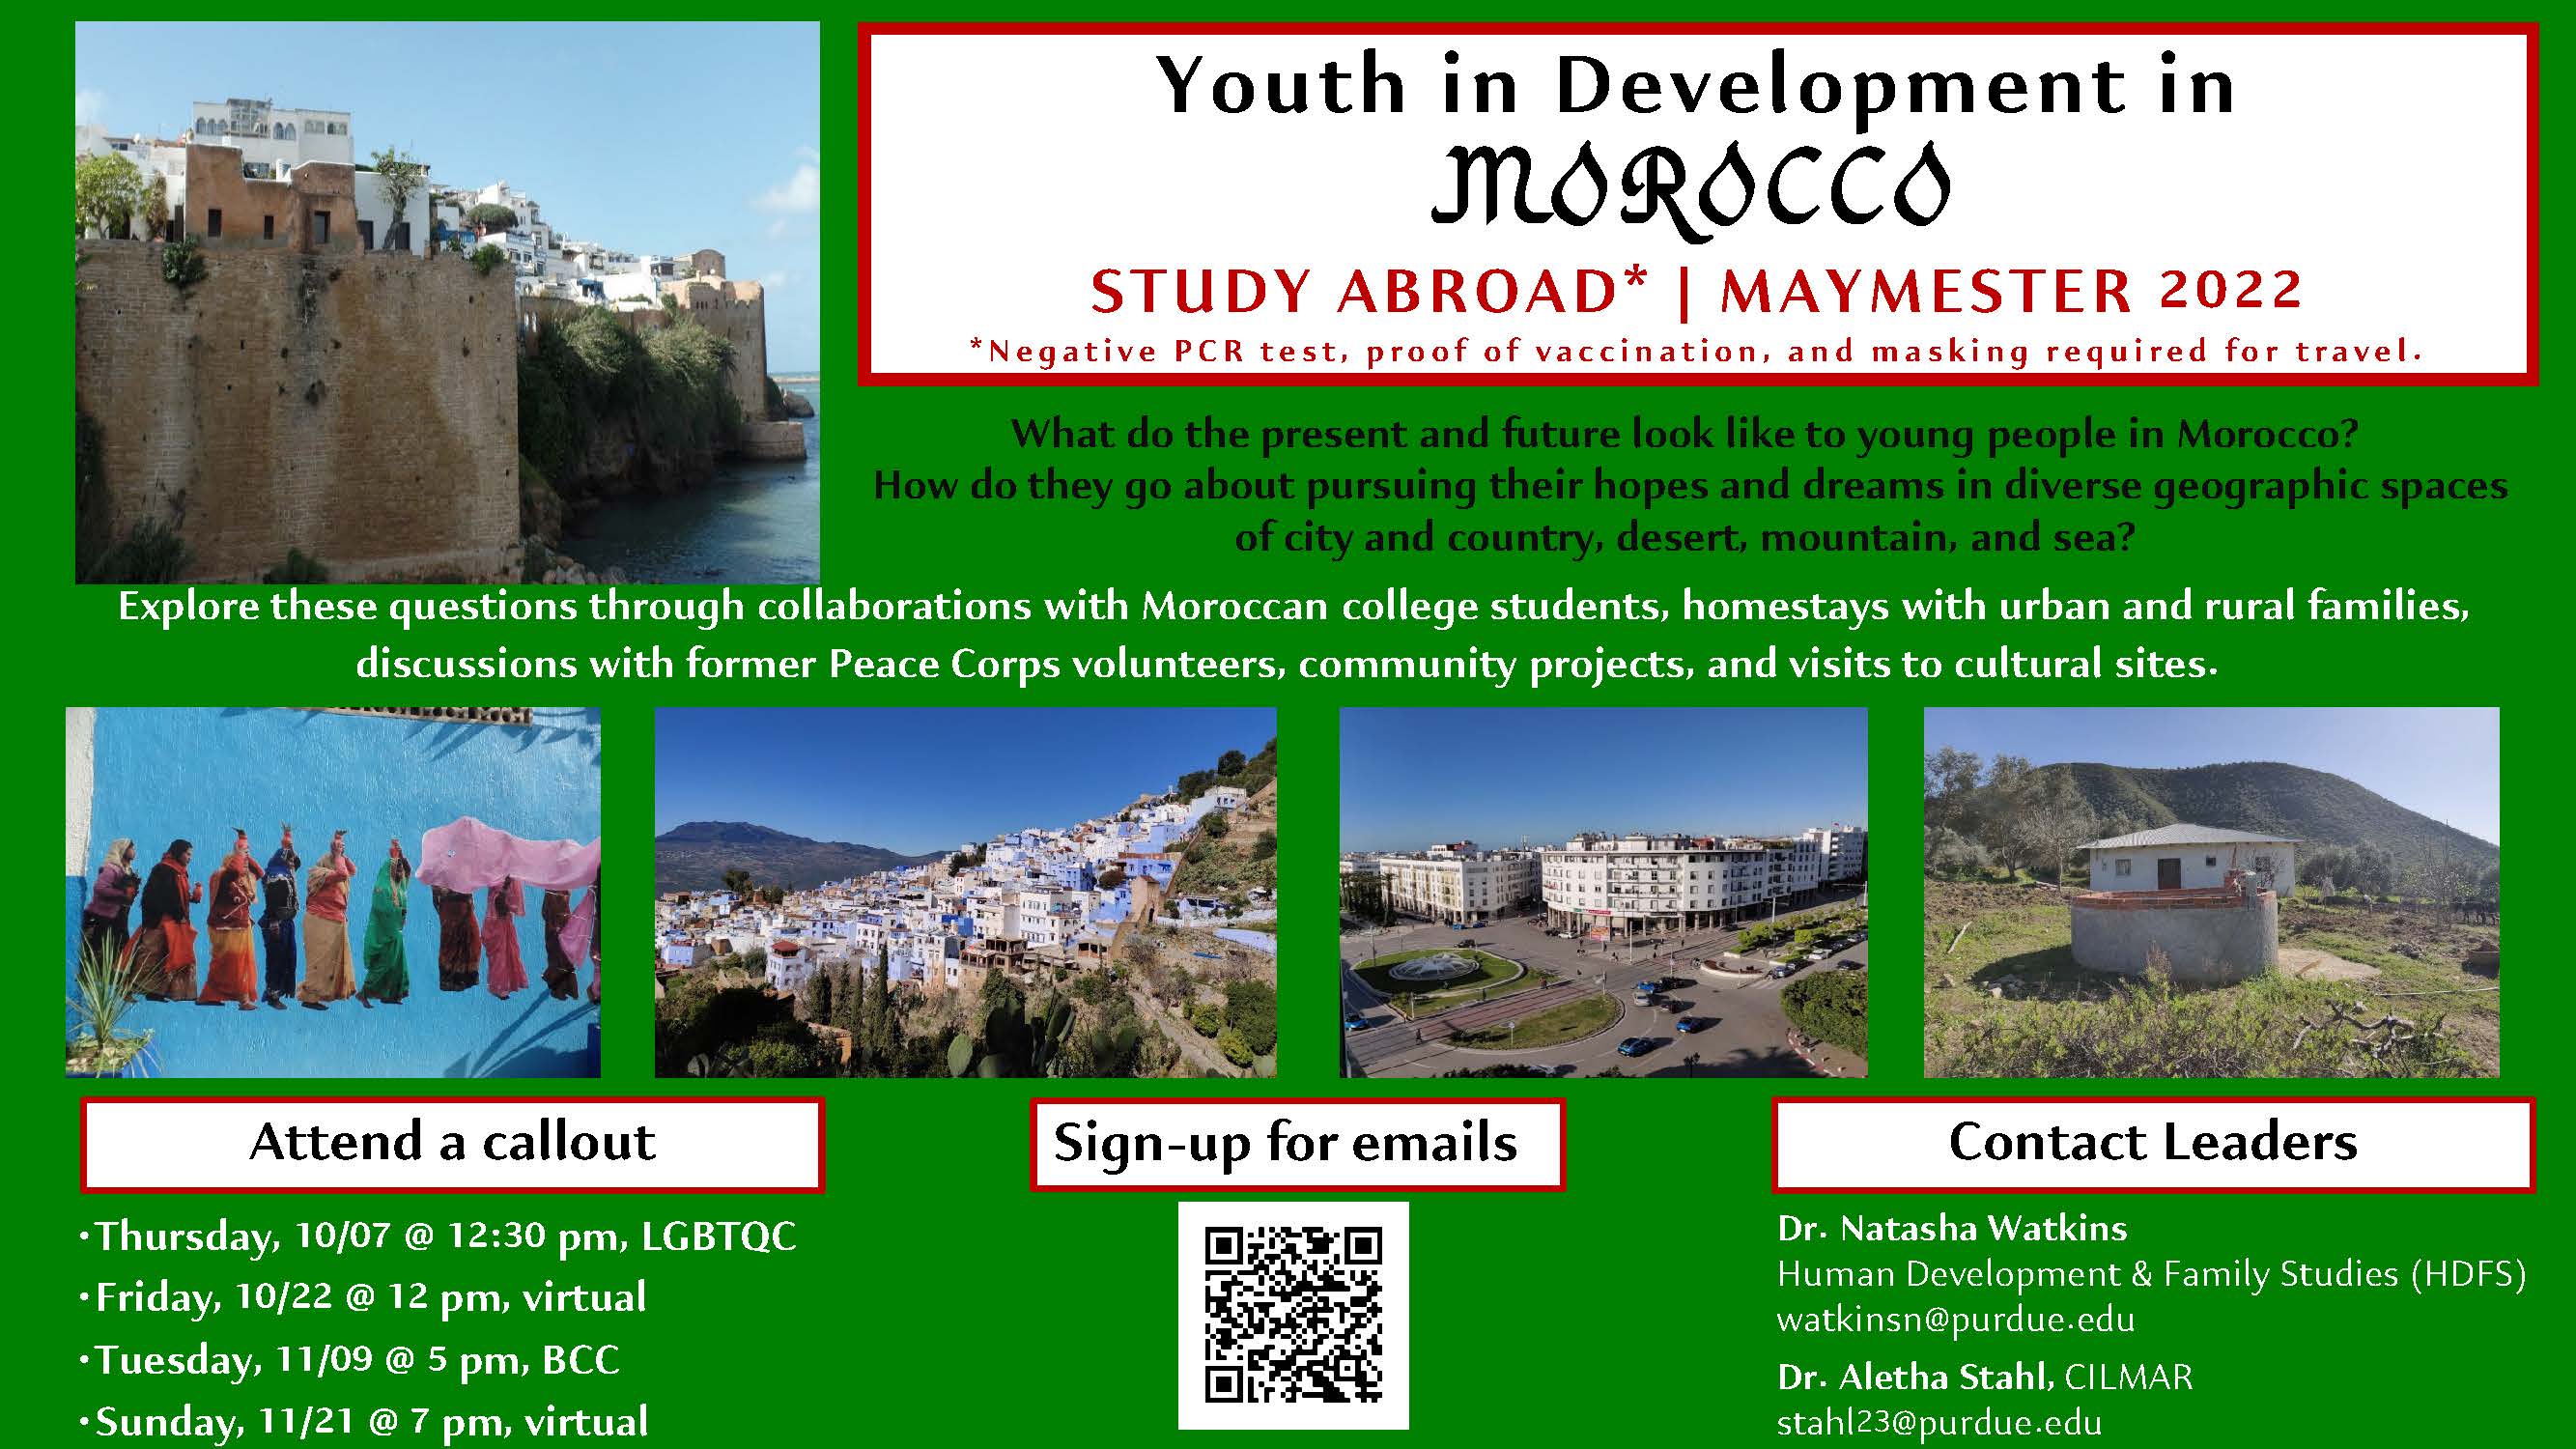 This is a picture of a flyer. A wonderful opportunity during the Maymester of Spring 2022 to study abroad in Morocco led by Aletha Stahl (CILMAR) and Dr. Natasha Watkins (HDFS). This program is open to all undergraduates, including those who will be graduating in May 2022.   This study abroad program will look at what the present and future looks like for young people in Morocco and how they go about pursuing their hopes and dreams in diverse geopgraphic spaces of city and country, desert, mountains, and sea.   Four callouts will be held during the Fall 2021 semester:  Thursdsay, October 7 at 12:30pm, location: LGBTQ Center Friday, October 22 at 12:00pm, location: Virtual Tuesday, November 9 at 5:00pm, location: BCC Sunday, November 21 at 7:00pm, location: Virtual Contact Leaders:  Dr. Natasha Watkins - watkinsn@purdue.edu  Dr. Aletha Stahl - stahl23@purdue.edu 